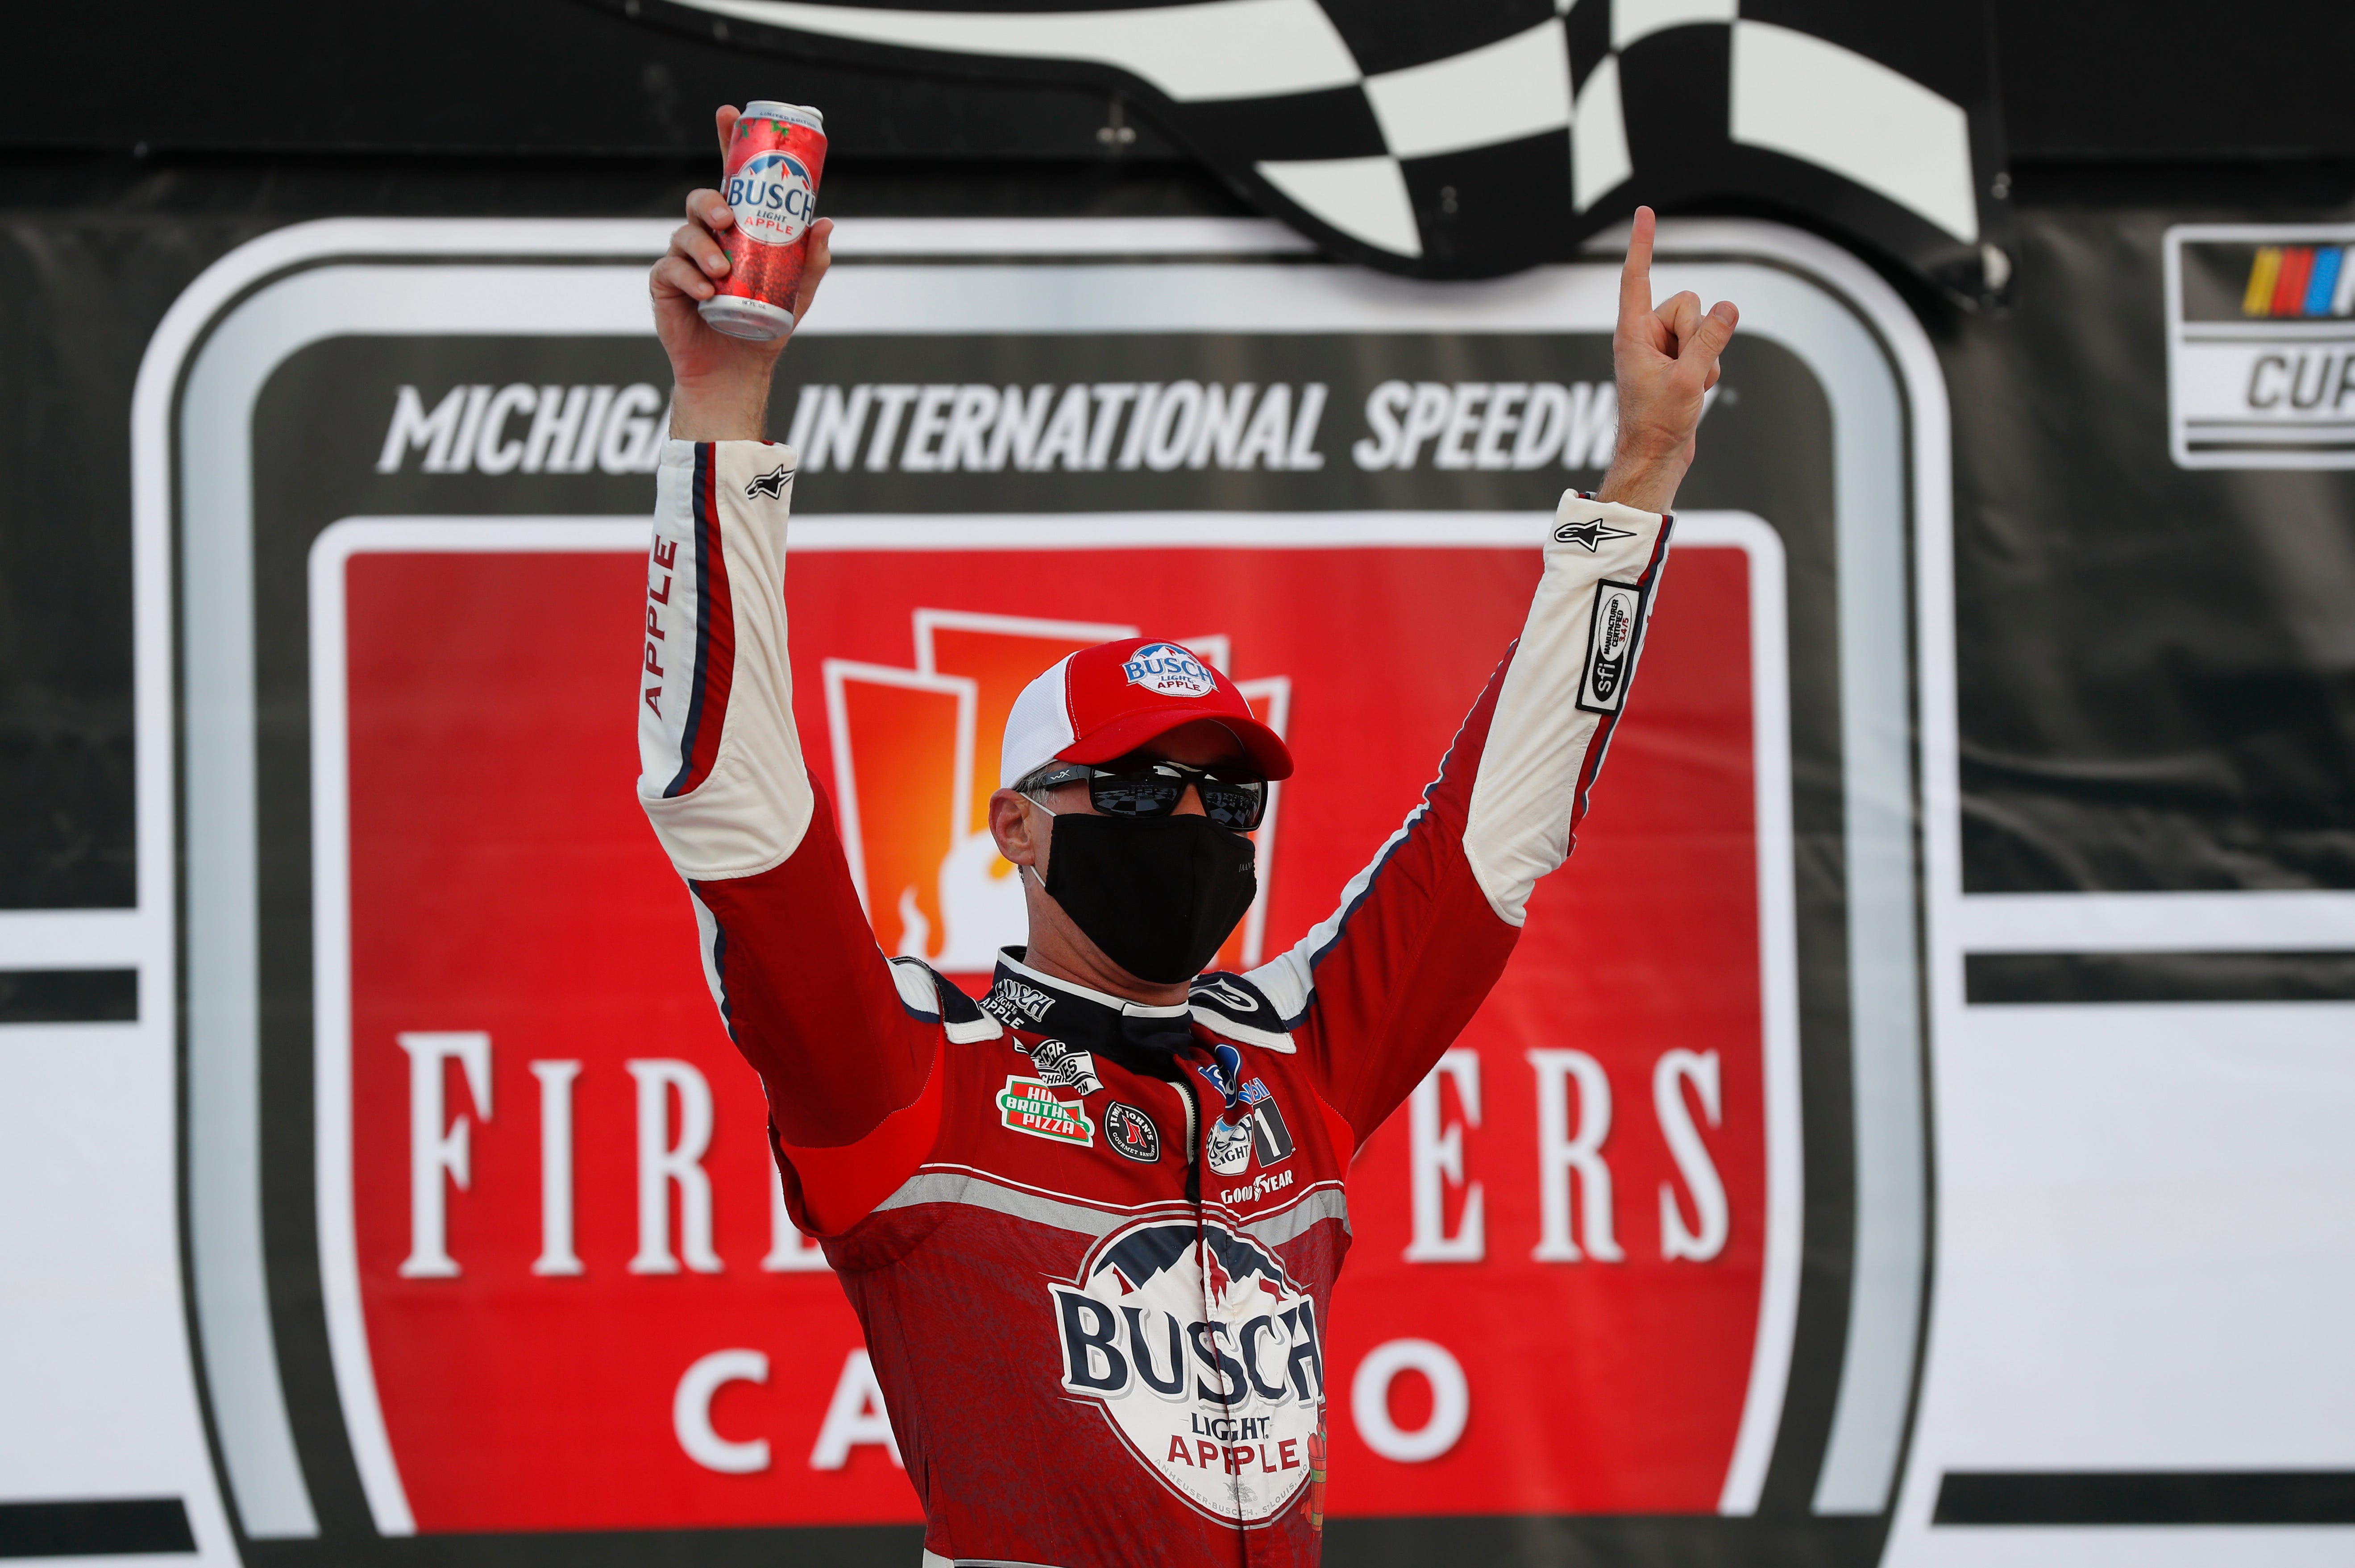 Kevin Harvick celebrates after winning a NASCAR Cup Series auto race at Michigan International Speedway in Brooklyn, Mich., Saturday, Aug. 8, 2020.